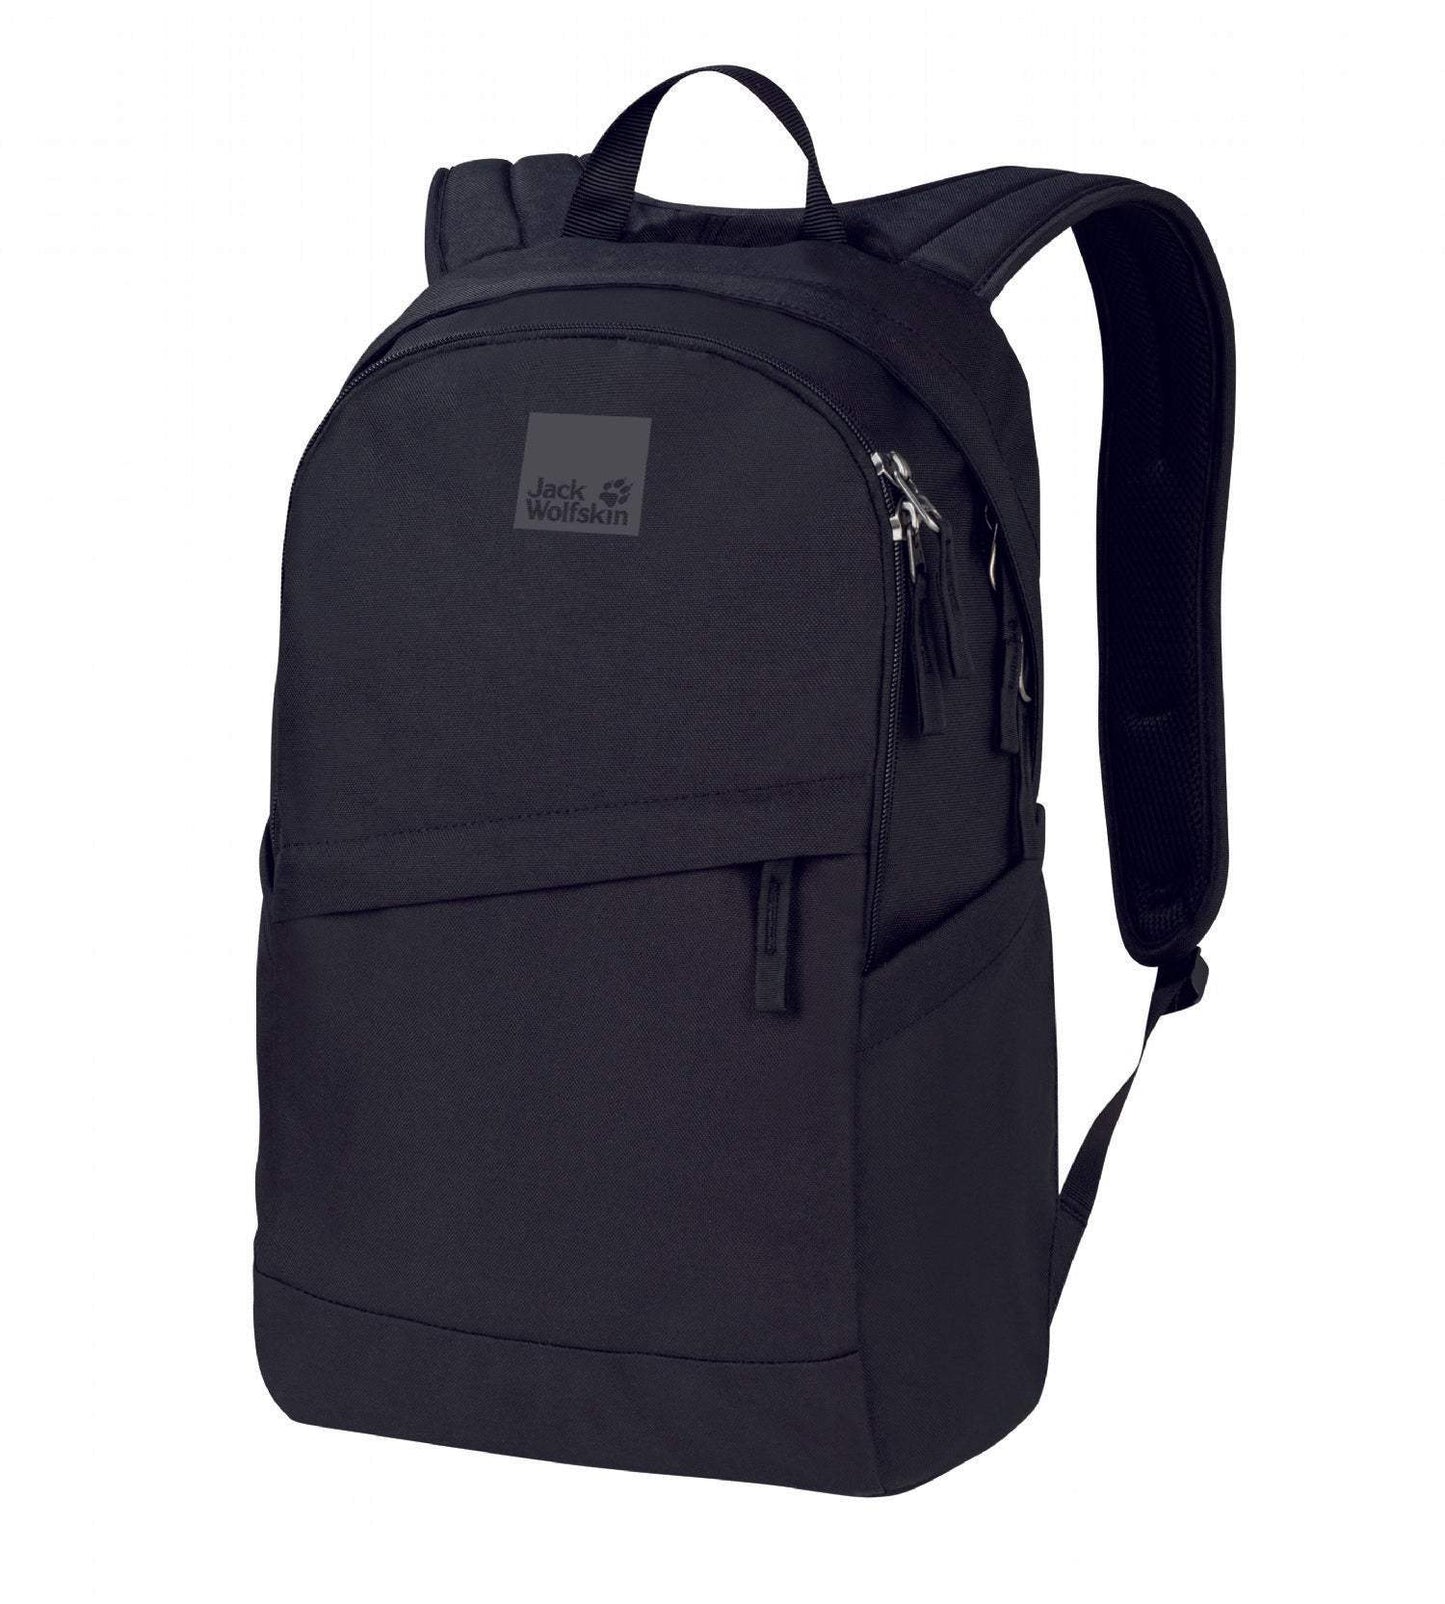 Perfect Day Daypack by Jack Wolfskin - The Luxury Promotional Gifts Company Limited